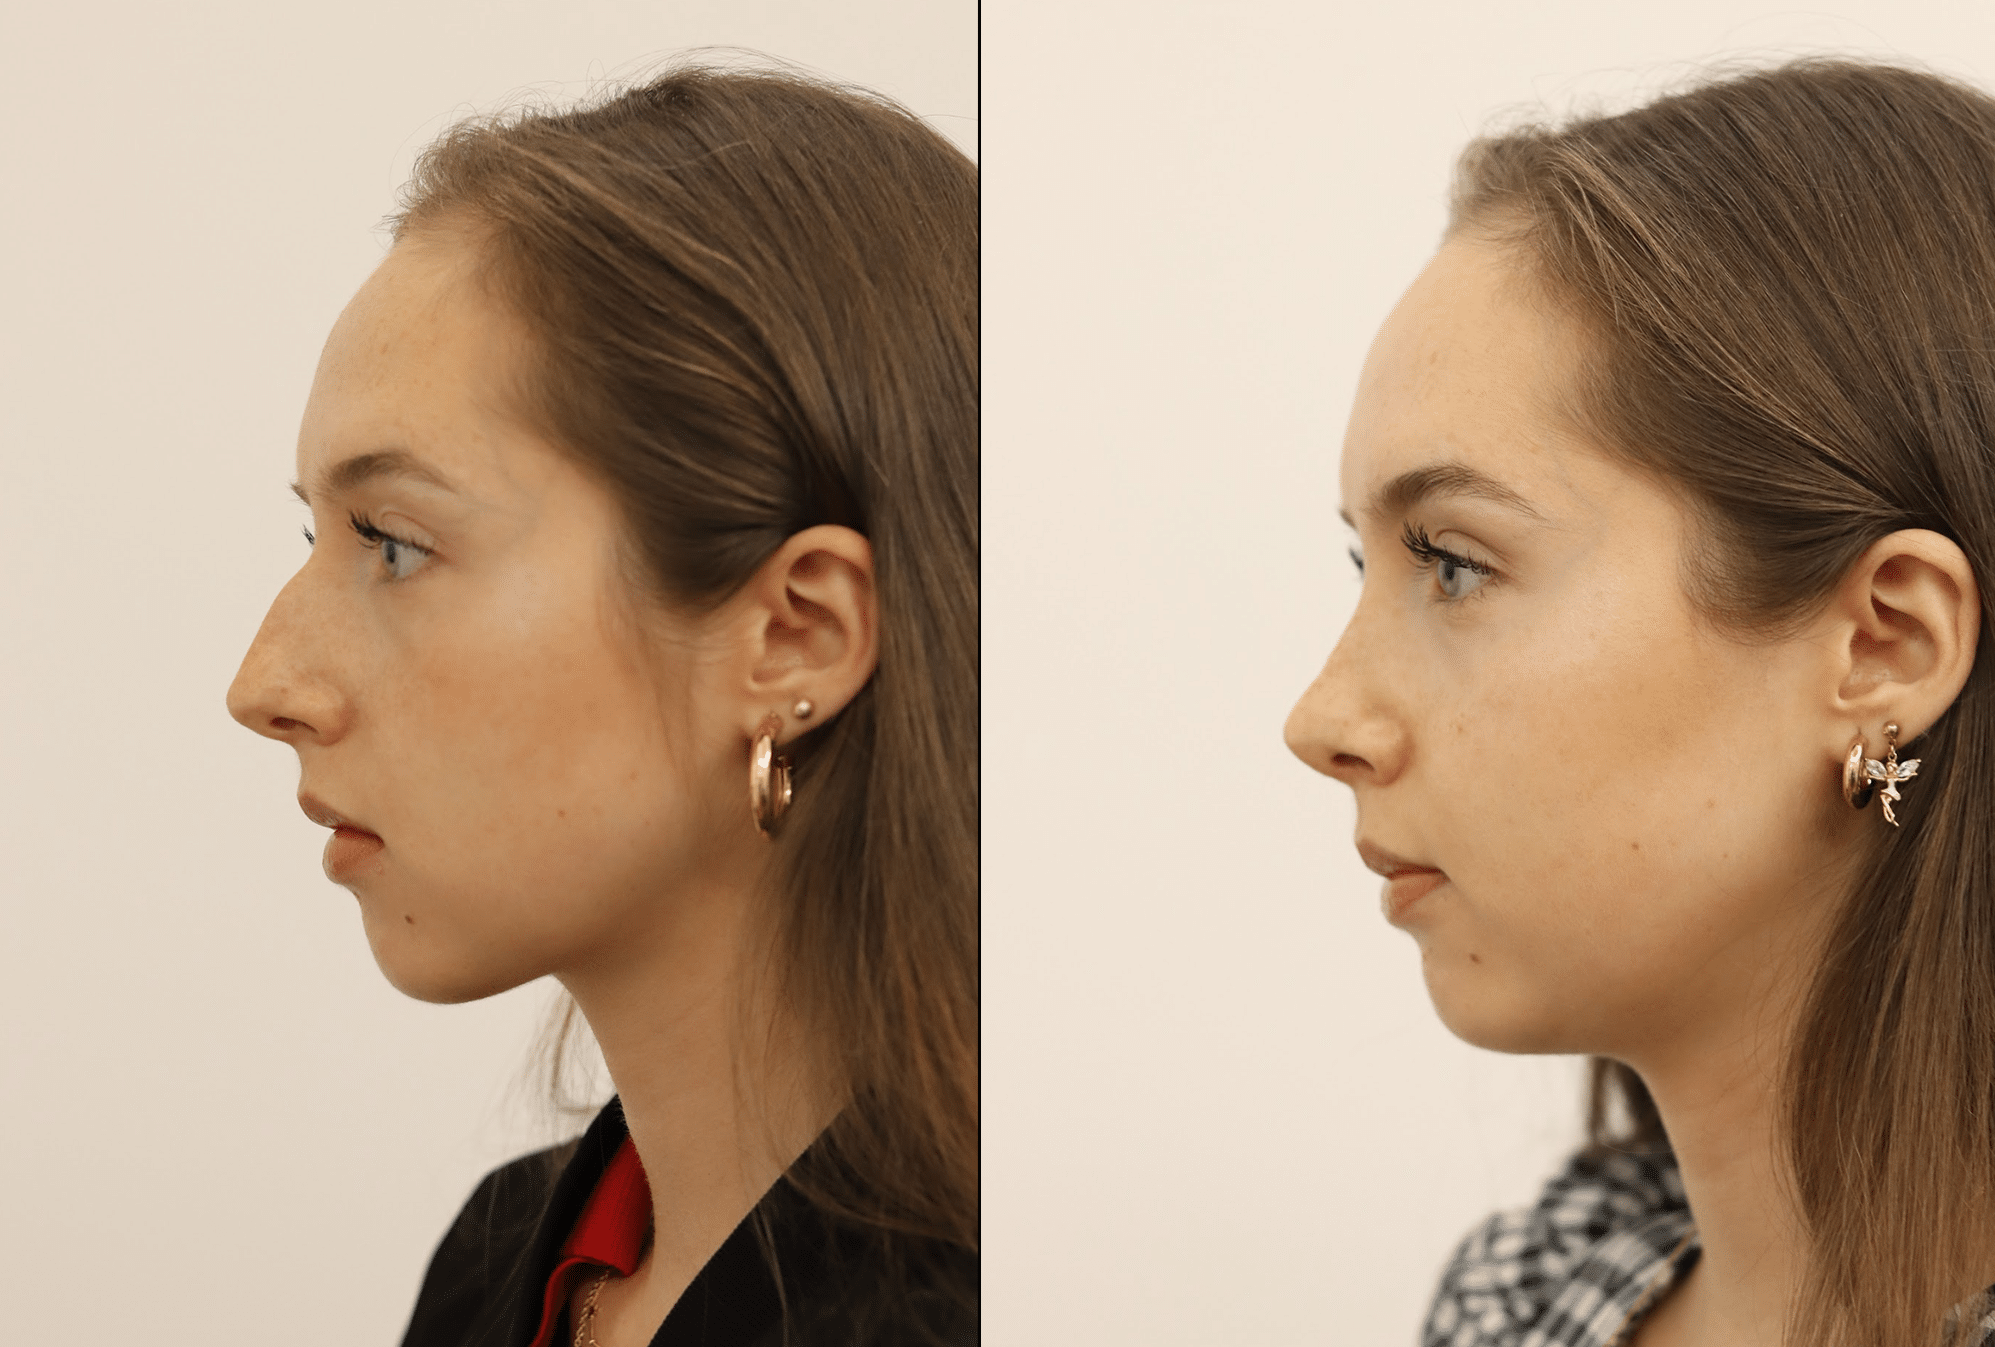 Facelift Before & After Photos - Facelift Surgery London